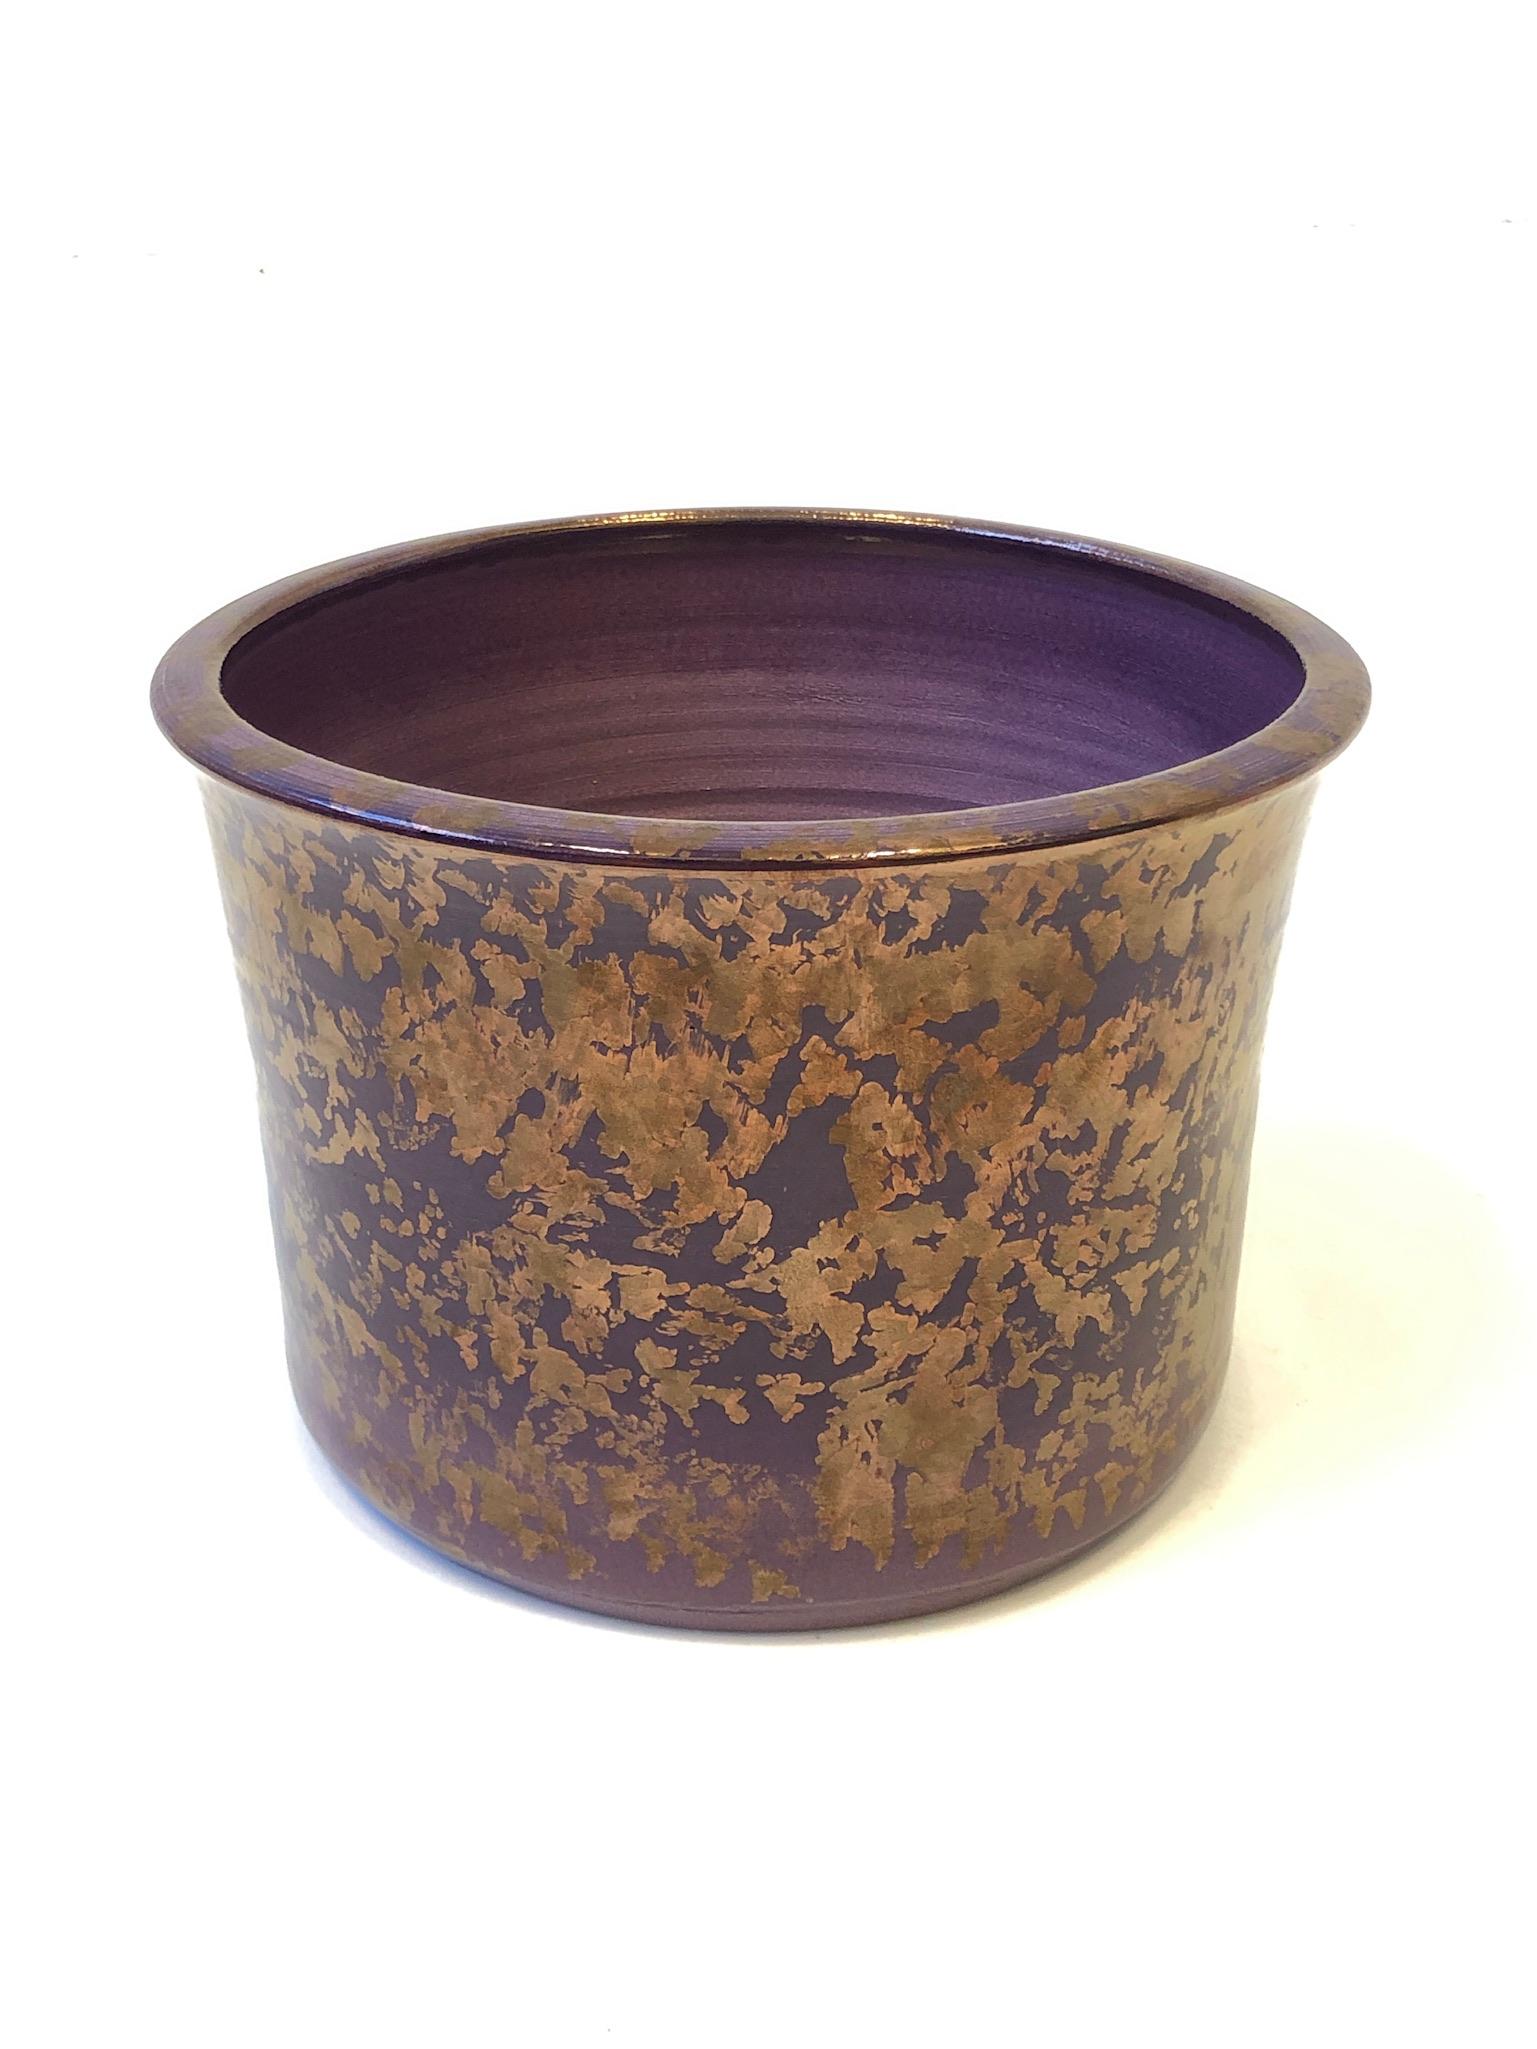 Glazed Studio Ceramic Cachepot by Gary McCloy for Steve Chase For Sale